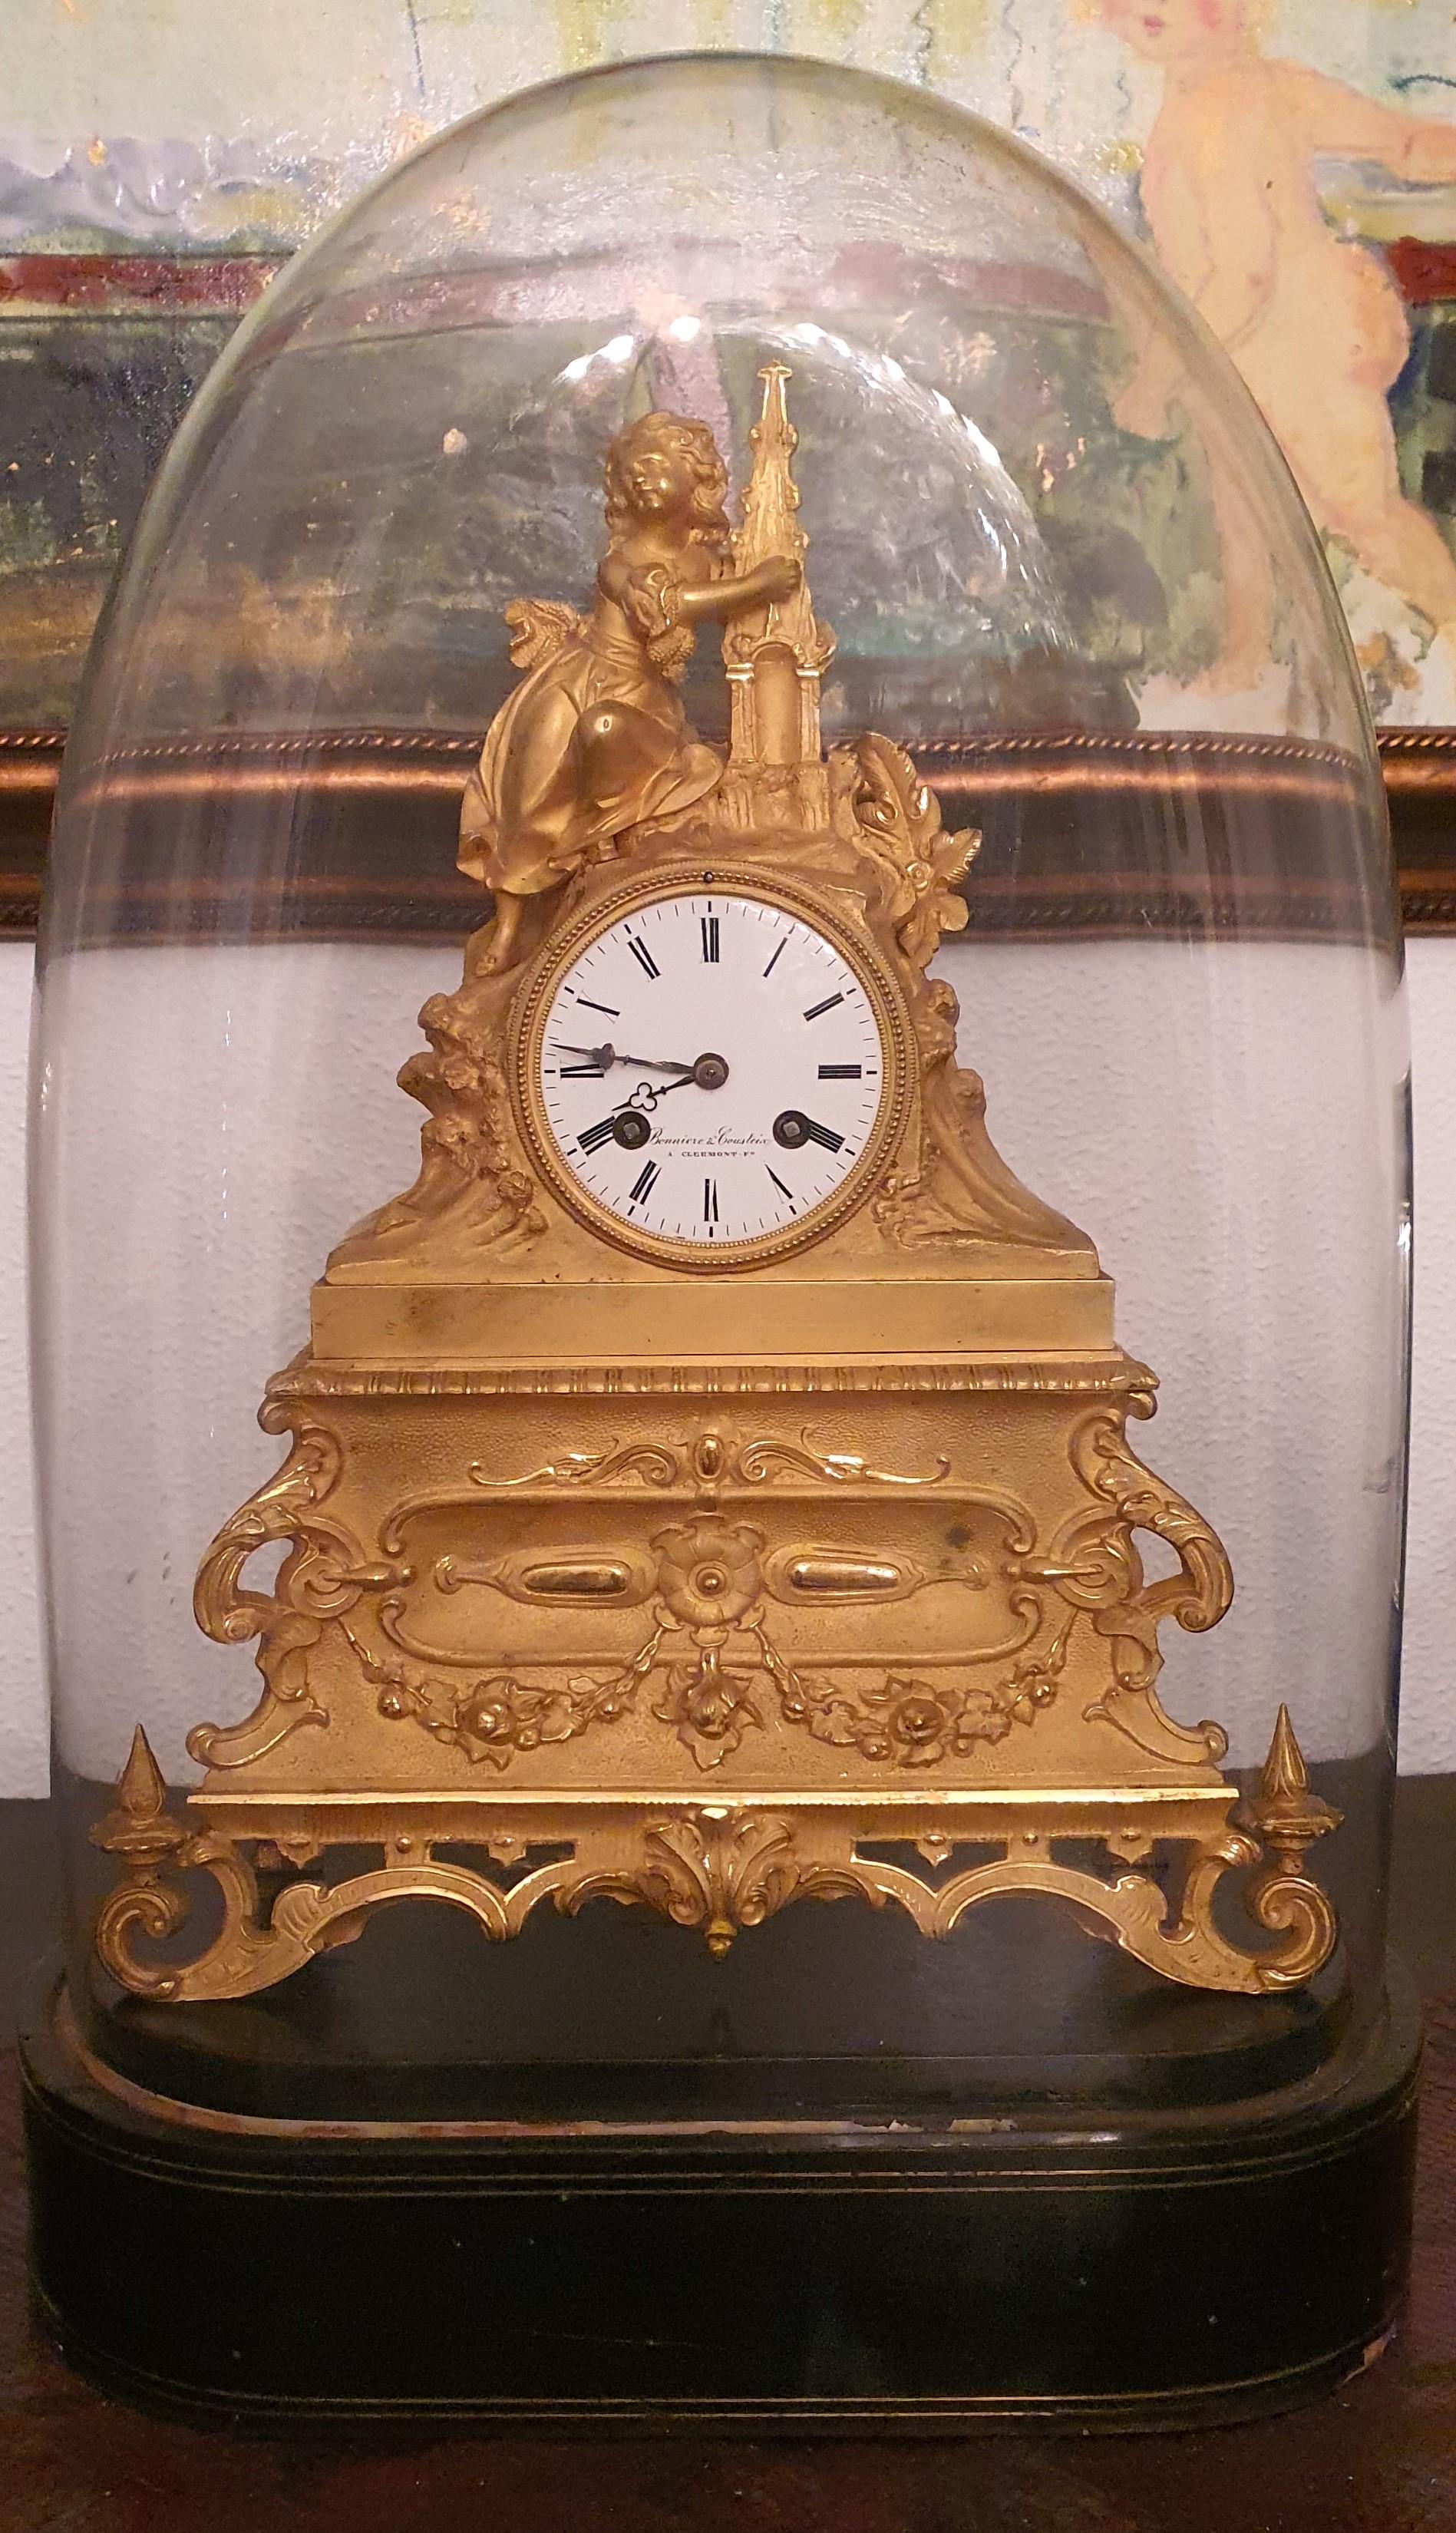 19th Century Exquisite 19th Gothic Revival Mantle Clock of Young Girl Holding Spire by Pons For Sale